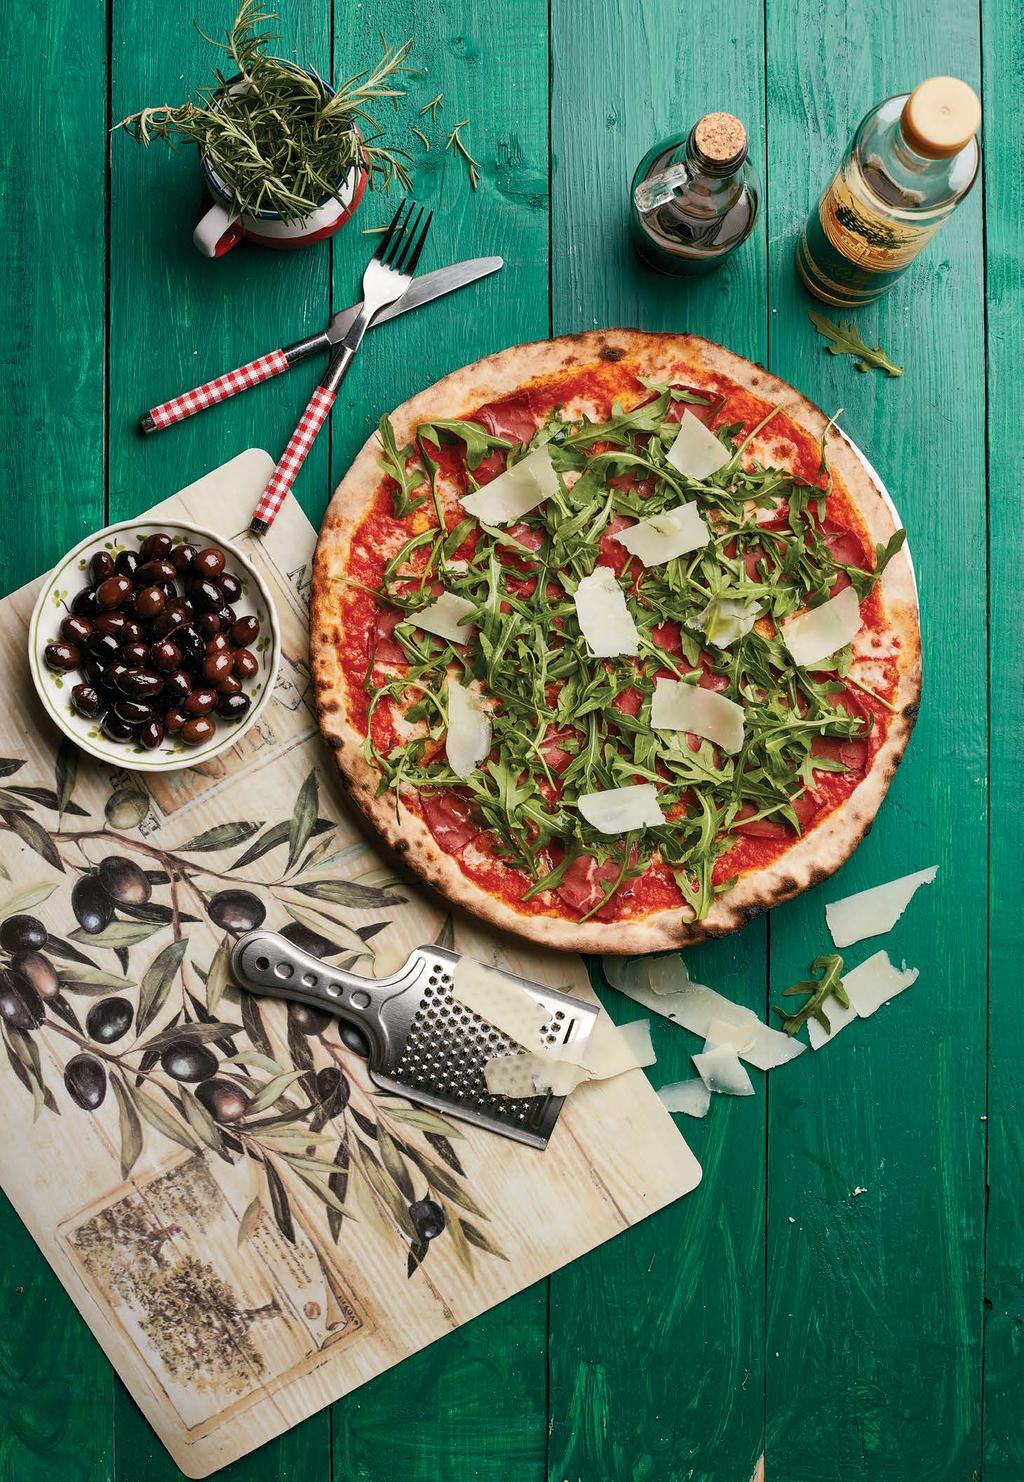 Passion, purpose & pizza From Rome with love Our aim is to constantly serve an exceptional Italian pizza that is light, thin and crispy, made with superior ingredients in the traditional Roman way,